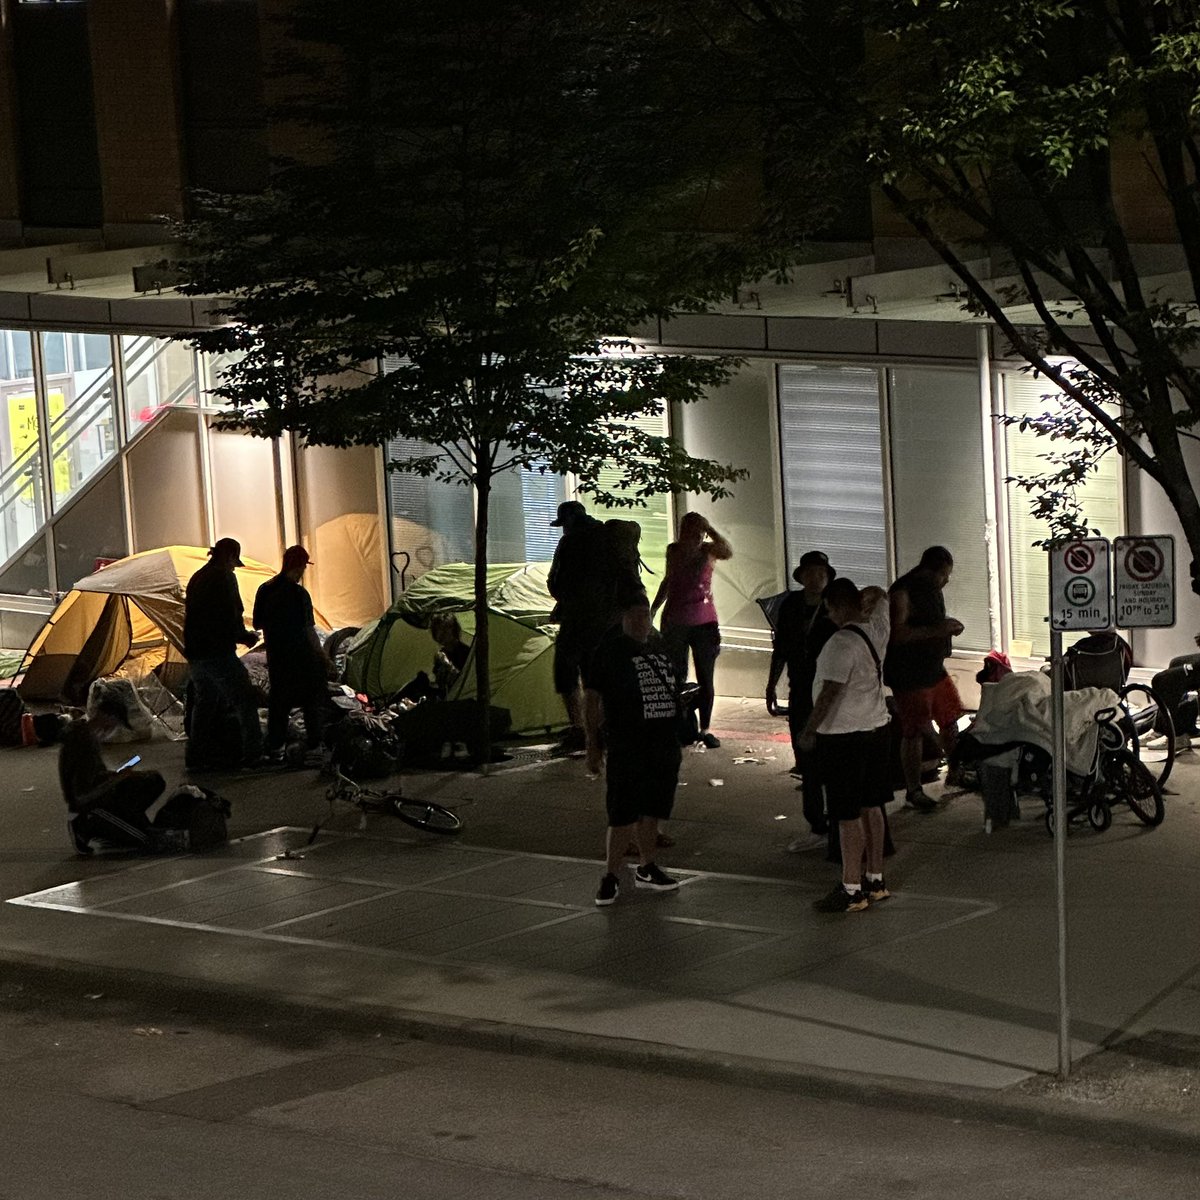 Last night at the OPS Downtown/Yaletown.
It’s ruining the community.
It’s worse every day.
It’s depressing.
It’s 24/7
You want this on your street, do you?
@KenSimCity @PeterMeiszner @VancouverPD @VCHhealthcare 
@DeputyChow @Dave_Eby @PierrePoilievre @nationalpost 
@KevinFalcon…